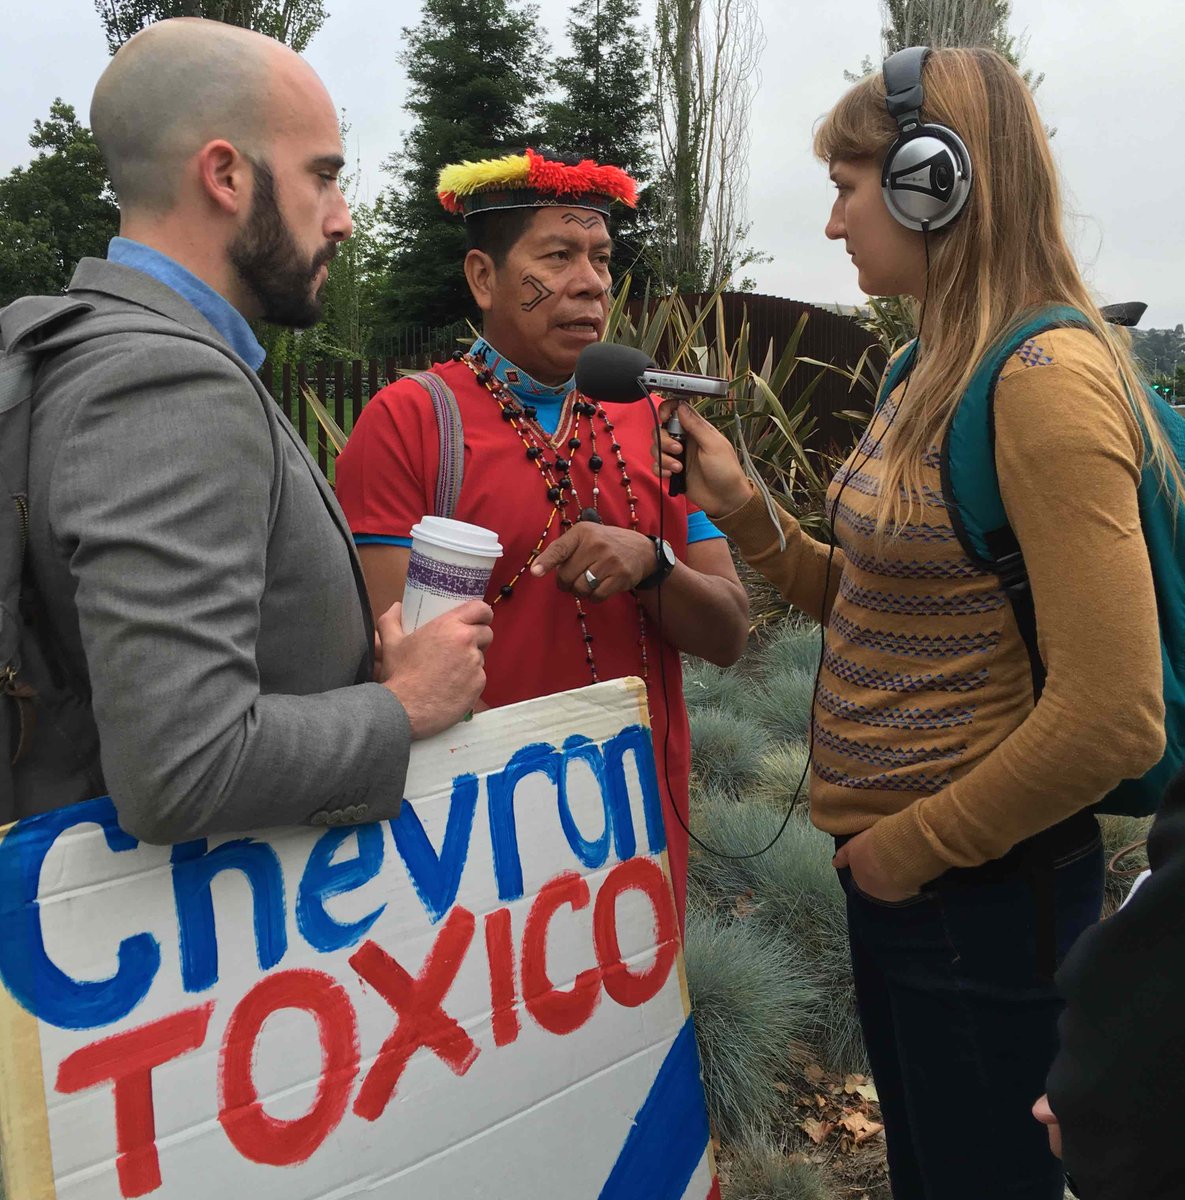 Activists, indigenous pple & scientists R inside & outside the #ChevronAGM demanding #ClimateJustice & #HumanRights!